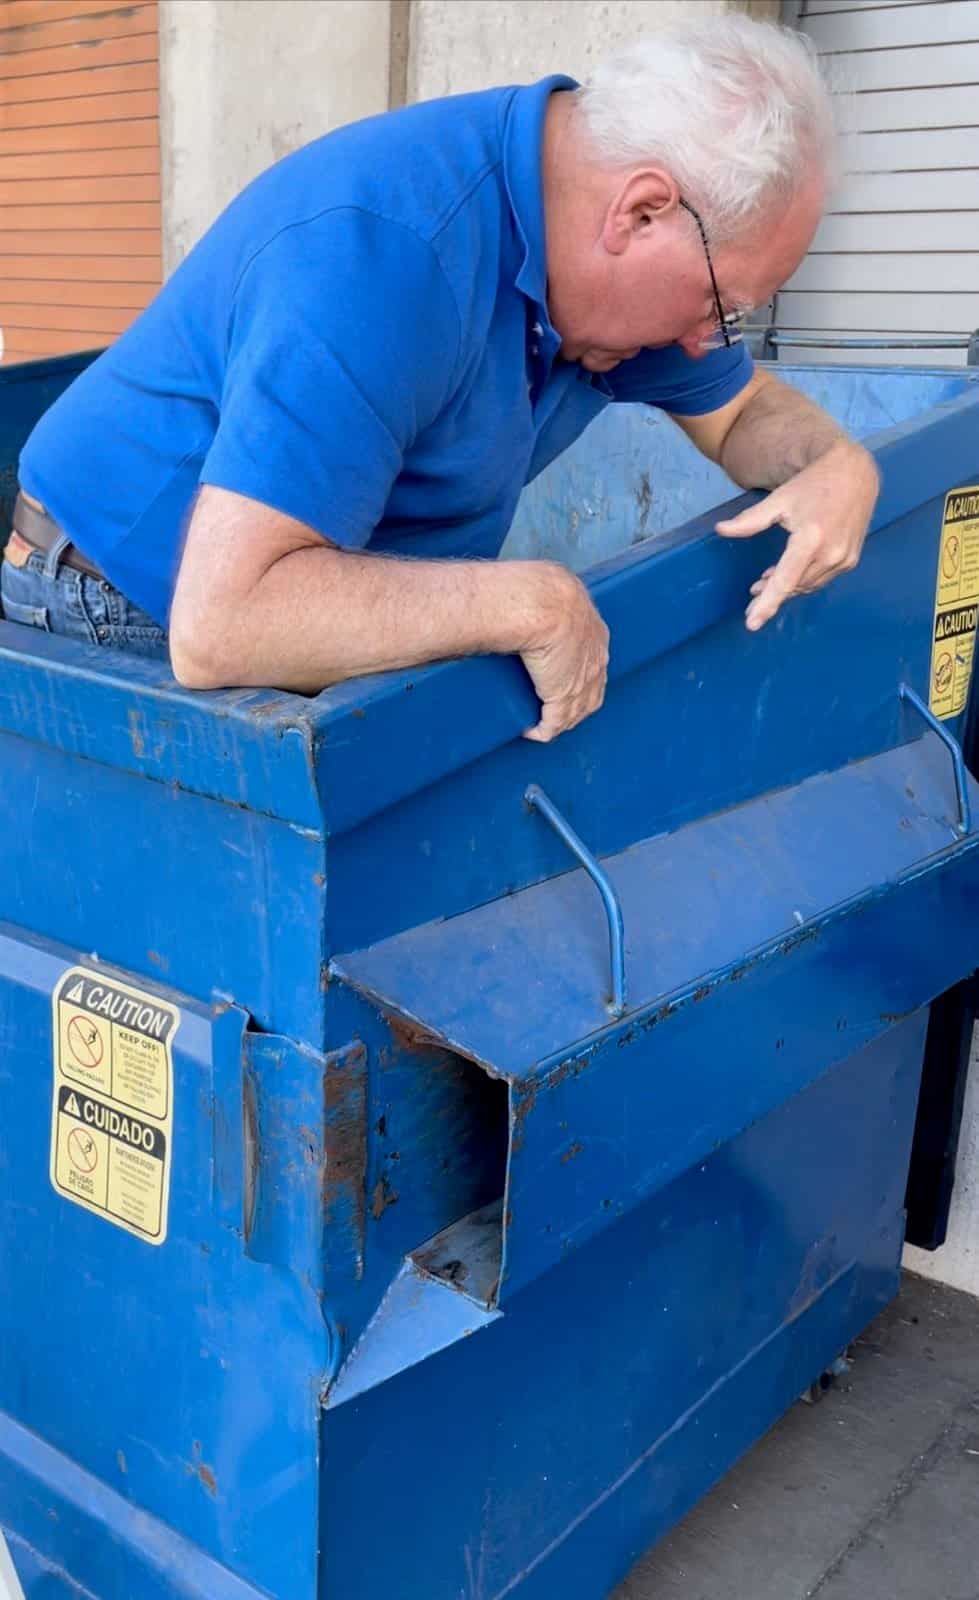 EXCLUSIVE: Retired Purple Heart Veteran in Arizona Who Dove
In Dumpster and Found Shredded Ballots Is Now Being
Threatened 1